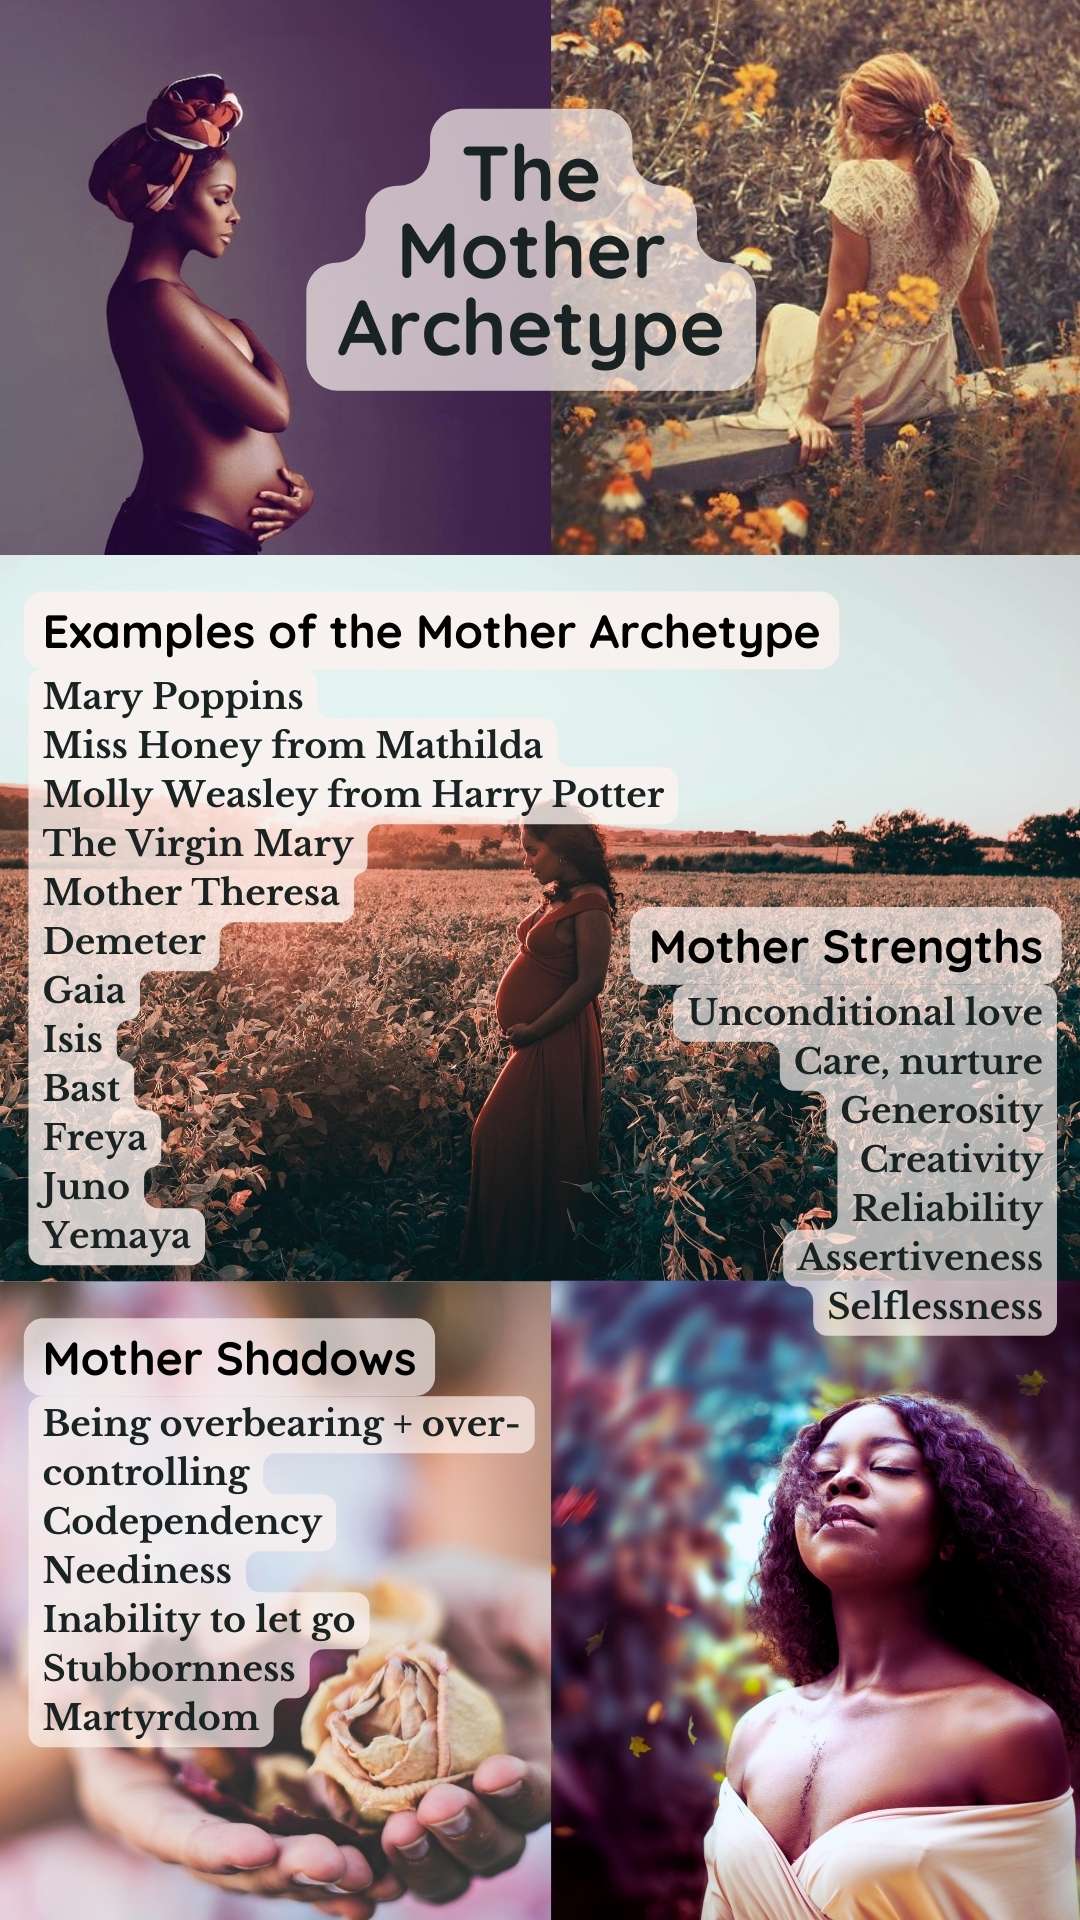 Guide to the Mother Archetype with examples, strengths and shadow side